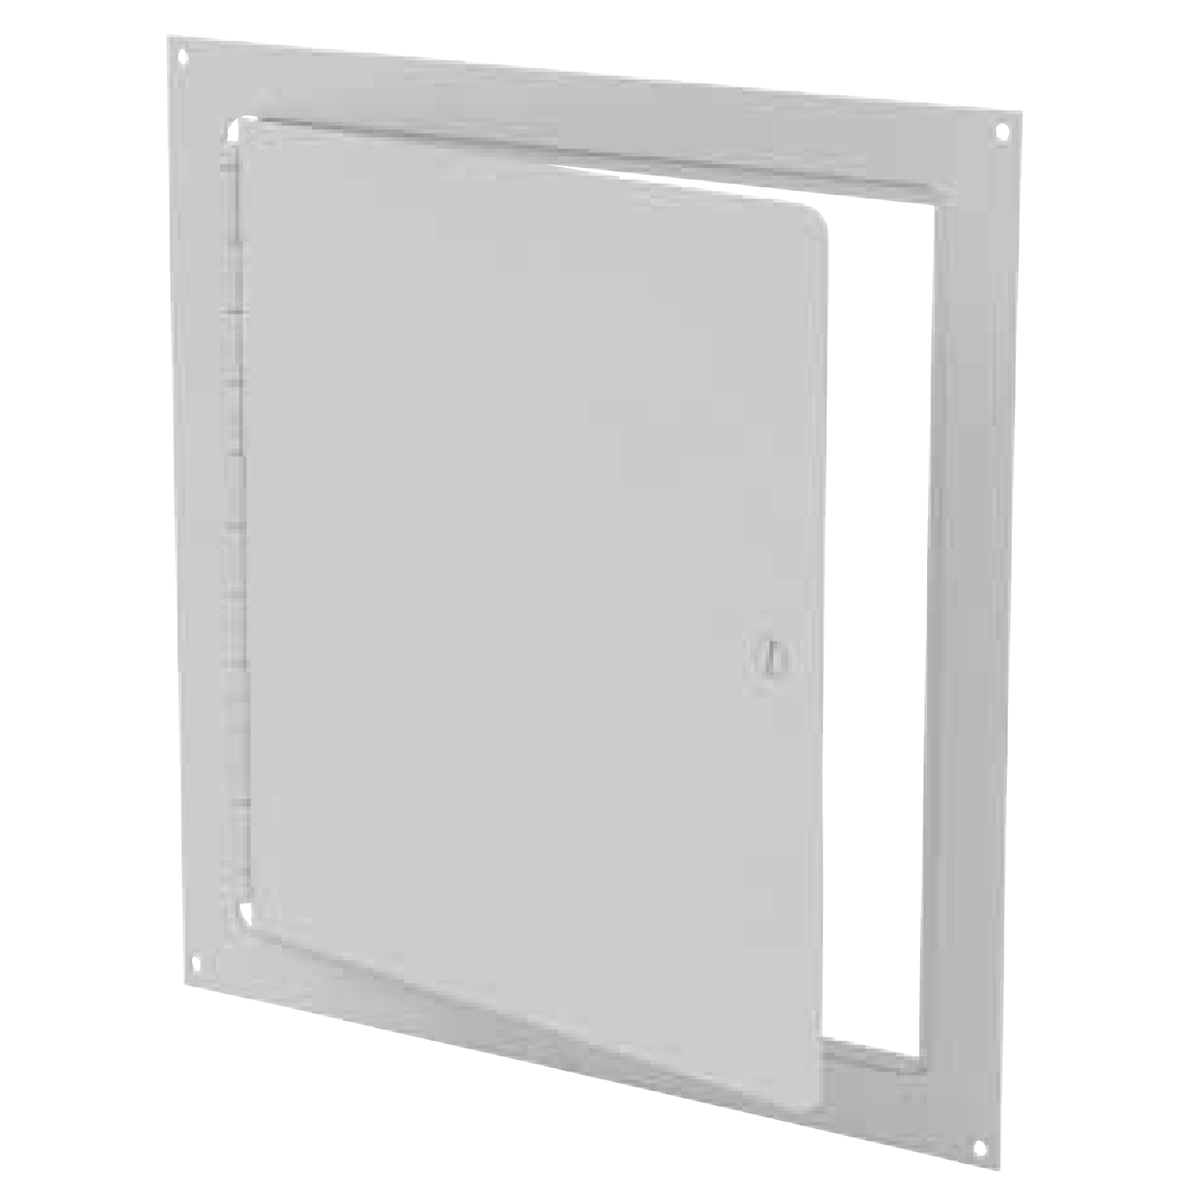 Access Door - E-SF 22x22 Surface Mount, Primer Coated Steel